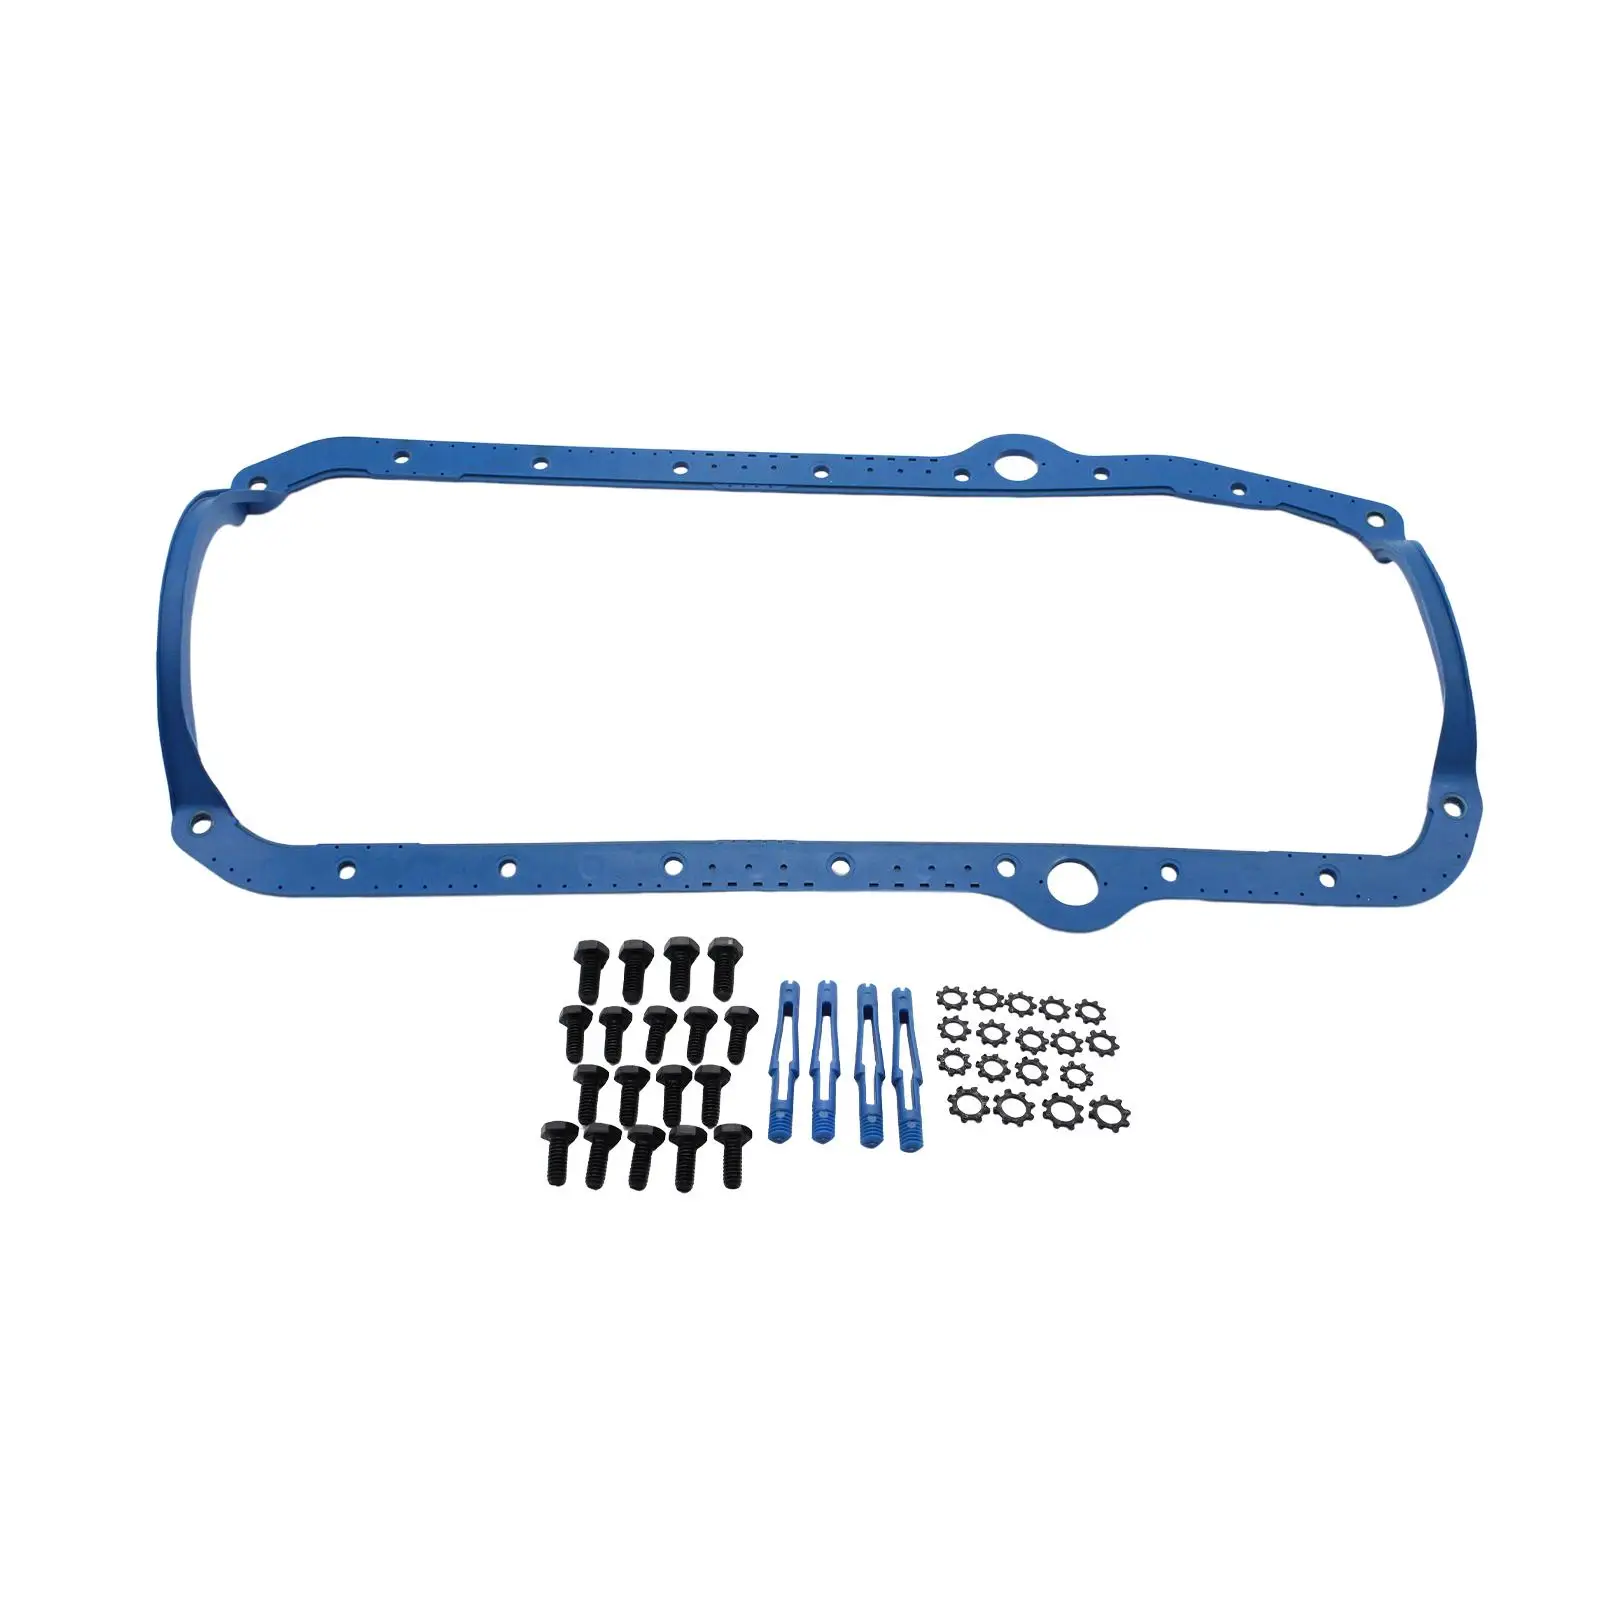 Oil Pan Gasket Set Replaces OS34510T for Small Block 1975-1985